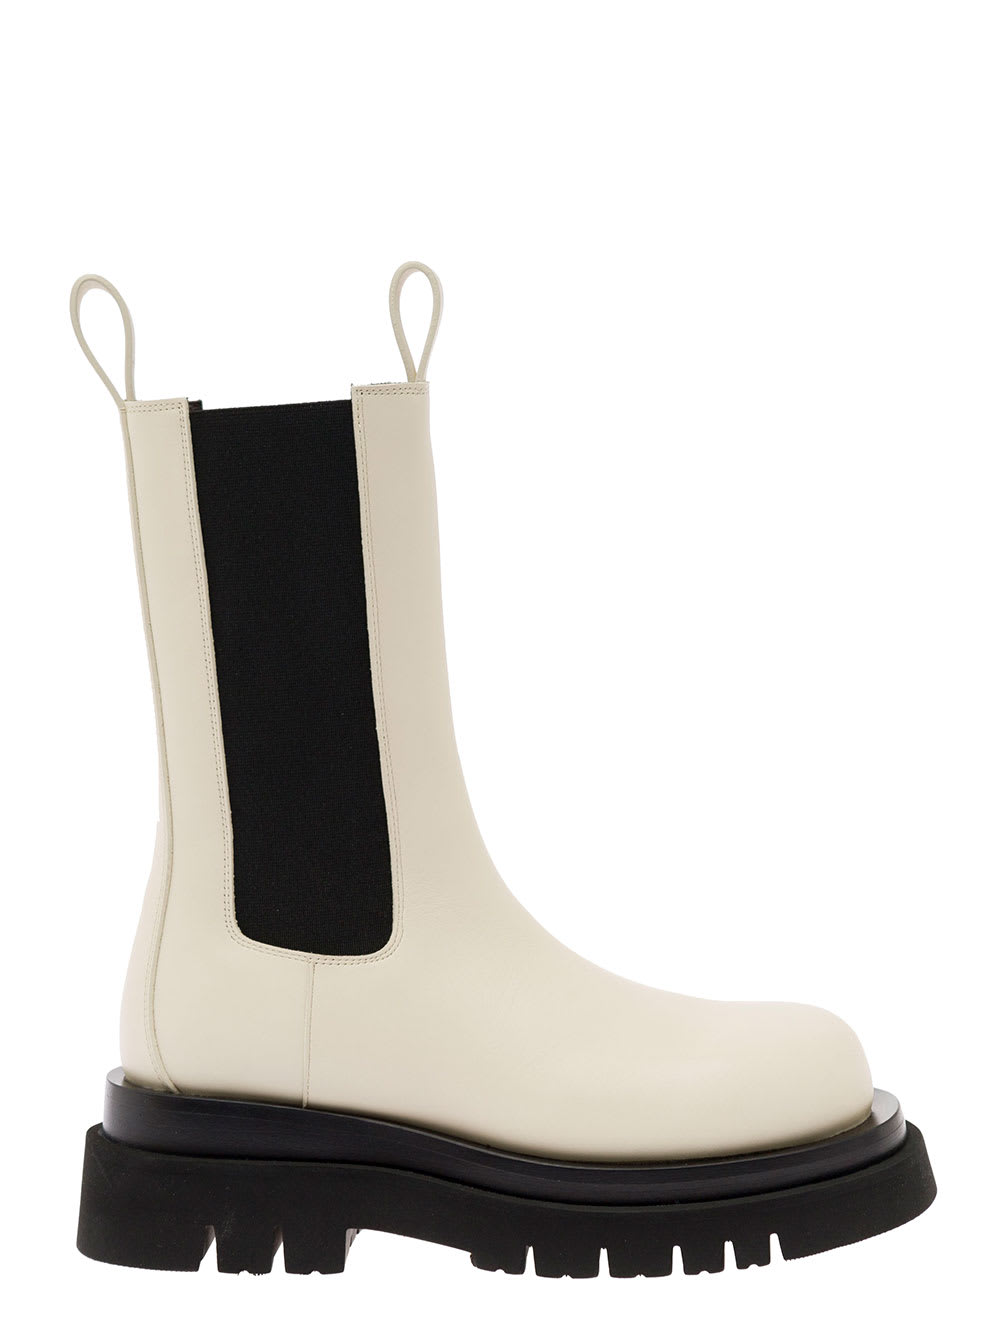 BOTTEGA VENETA BV LUG WHITE BOOTS WITH CONTRASTING MULTI-LAYERED SOLE IN LEATHER WOMAN